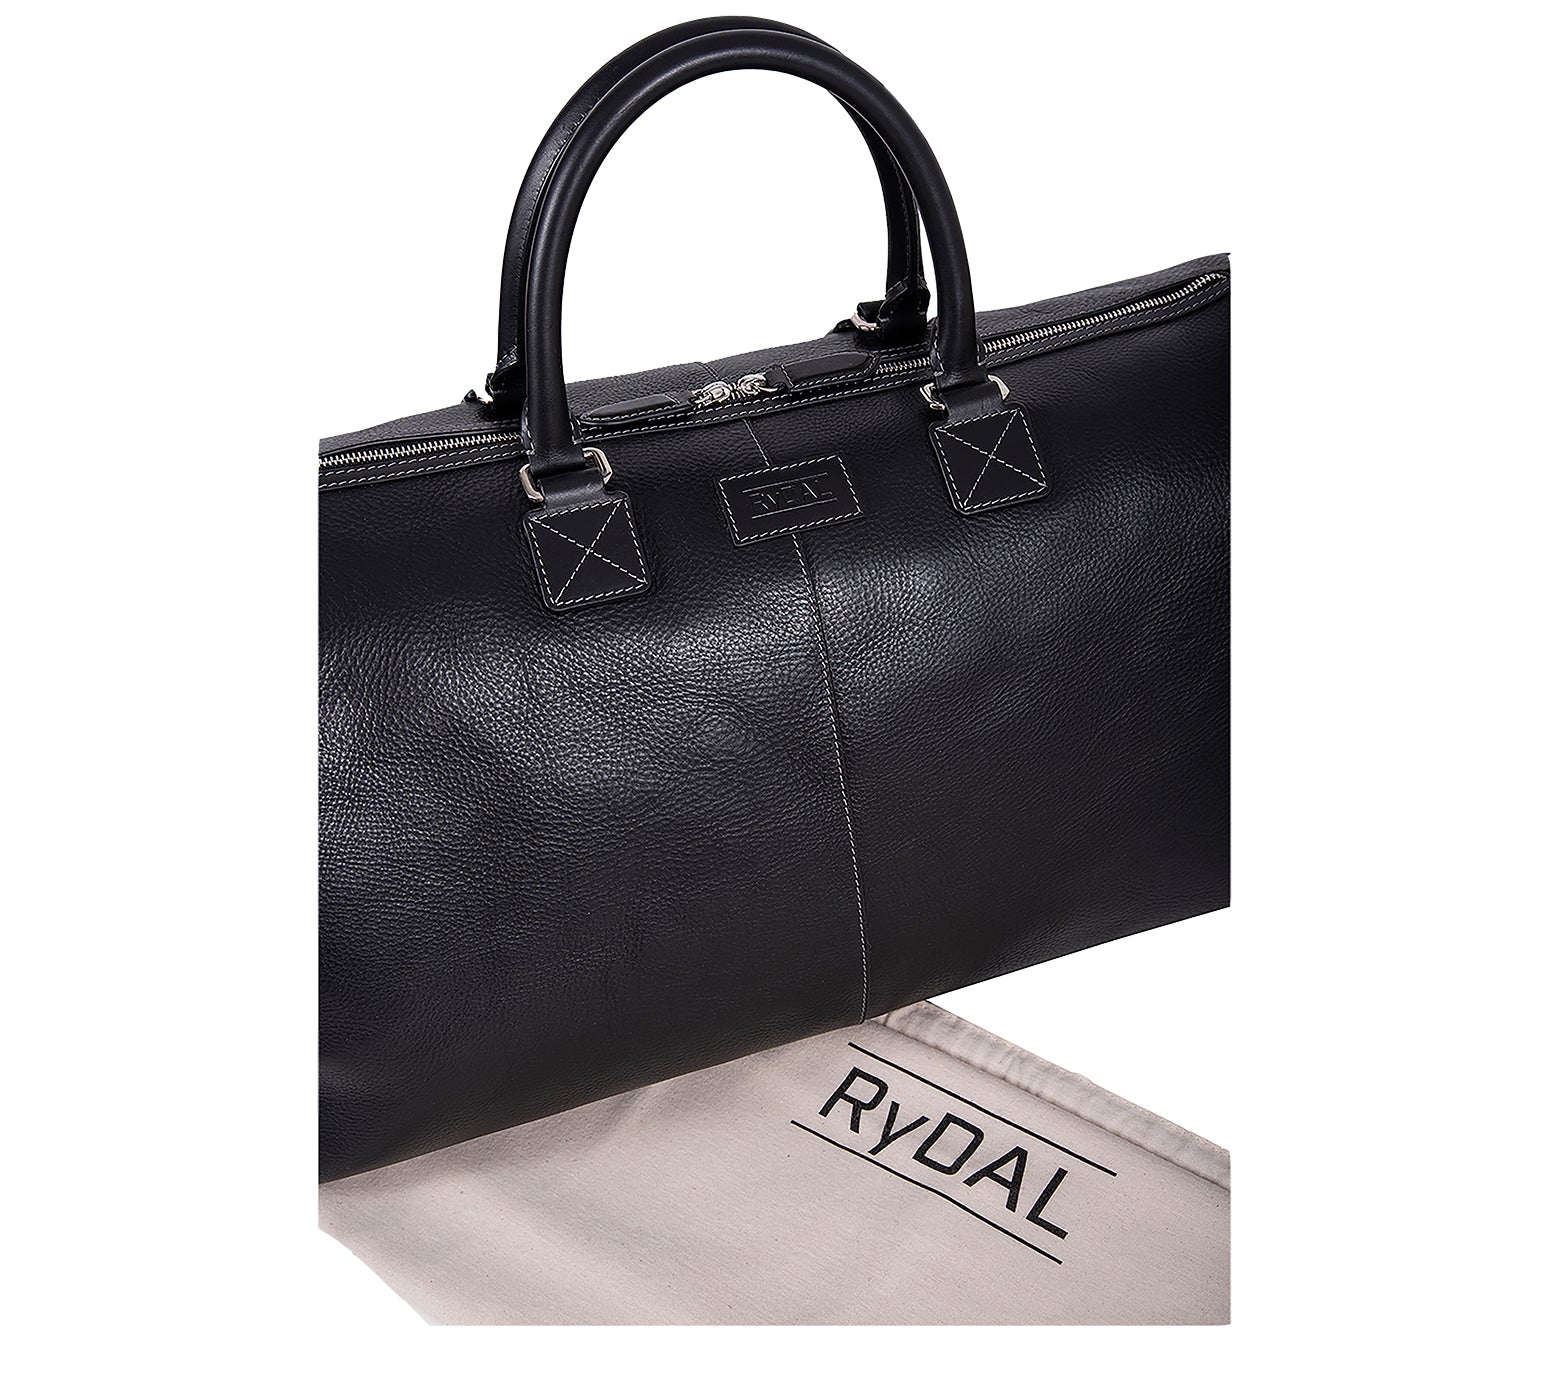 The Portland Mens Leather Travel Bag from Rydal in 'Black' with cotton bag.